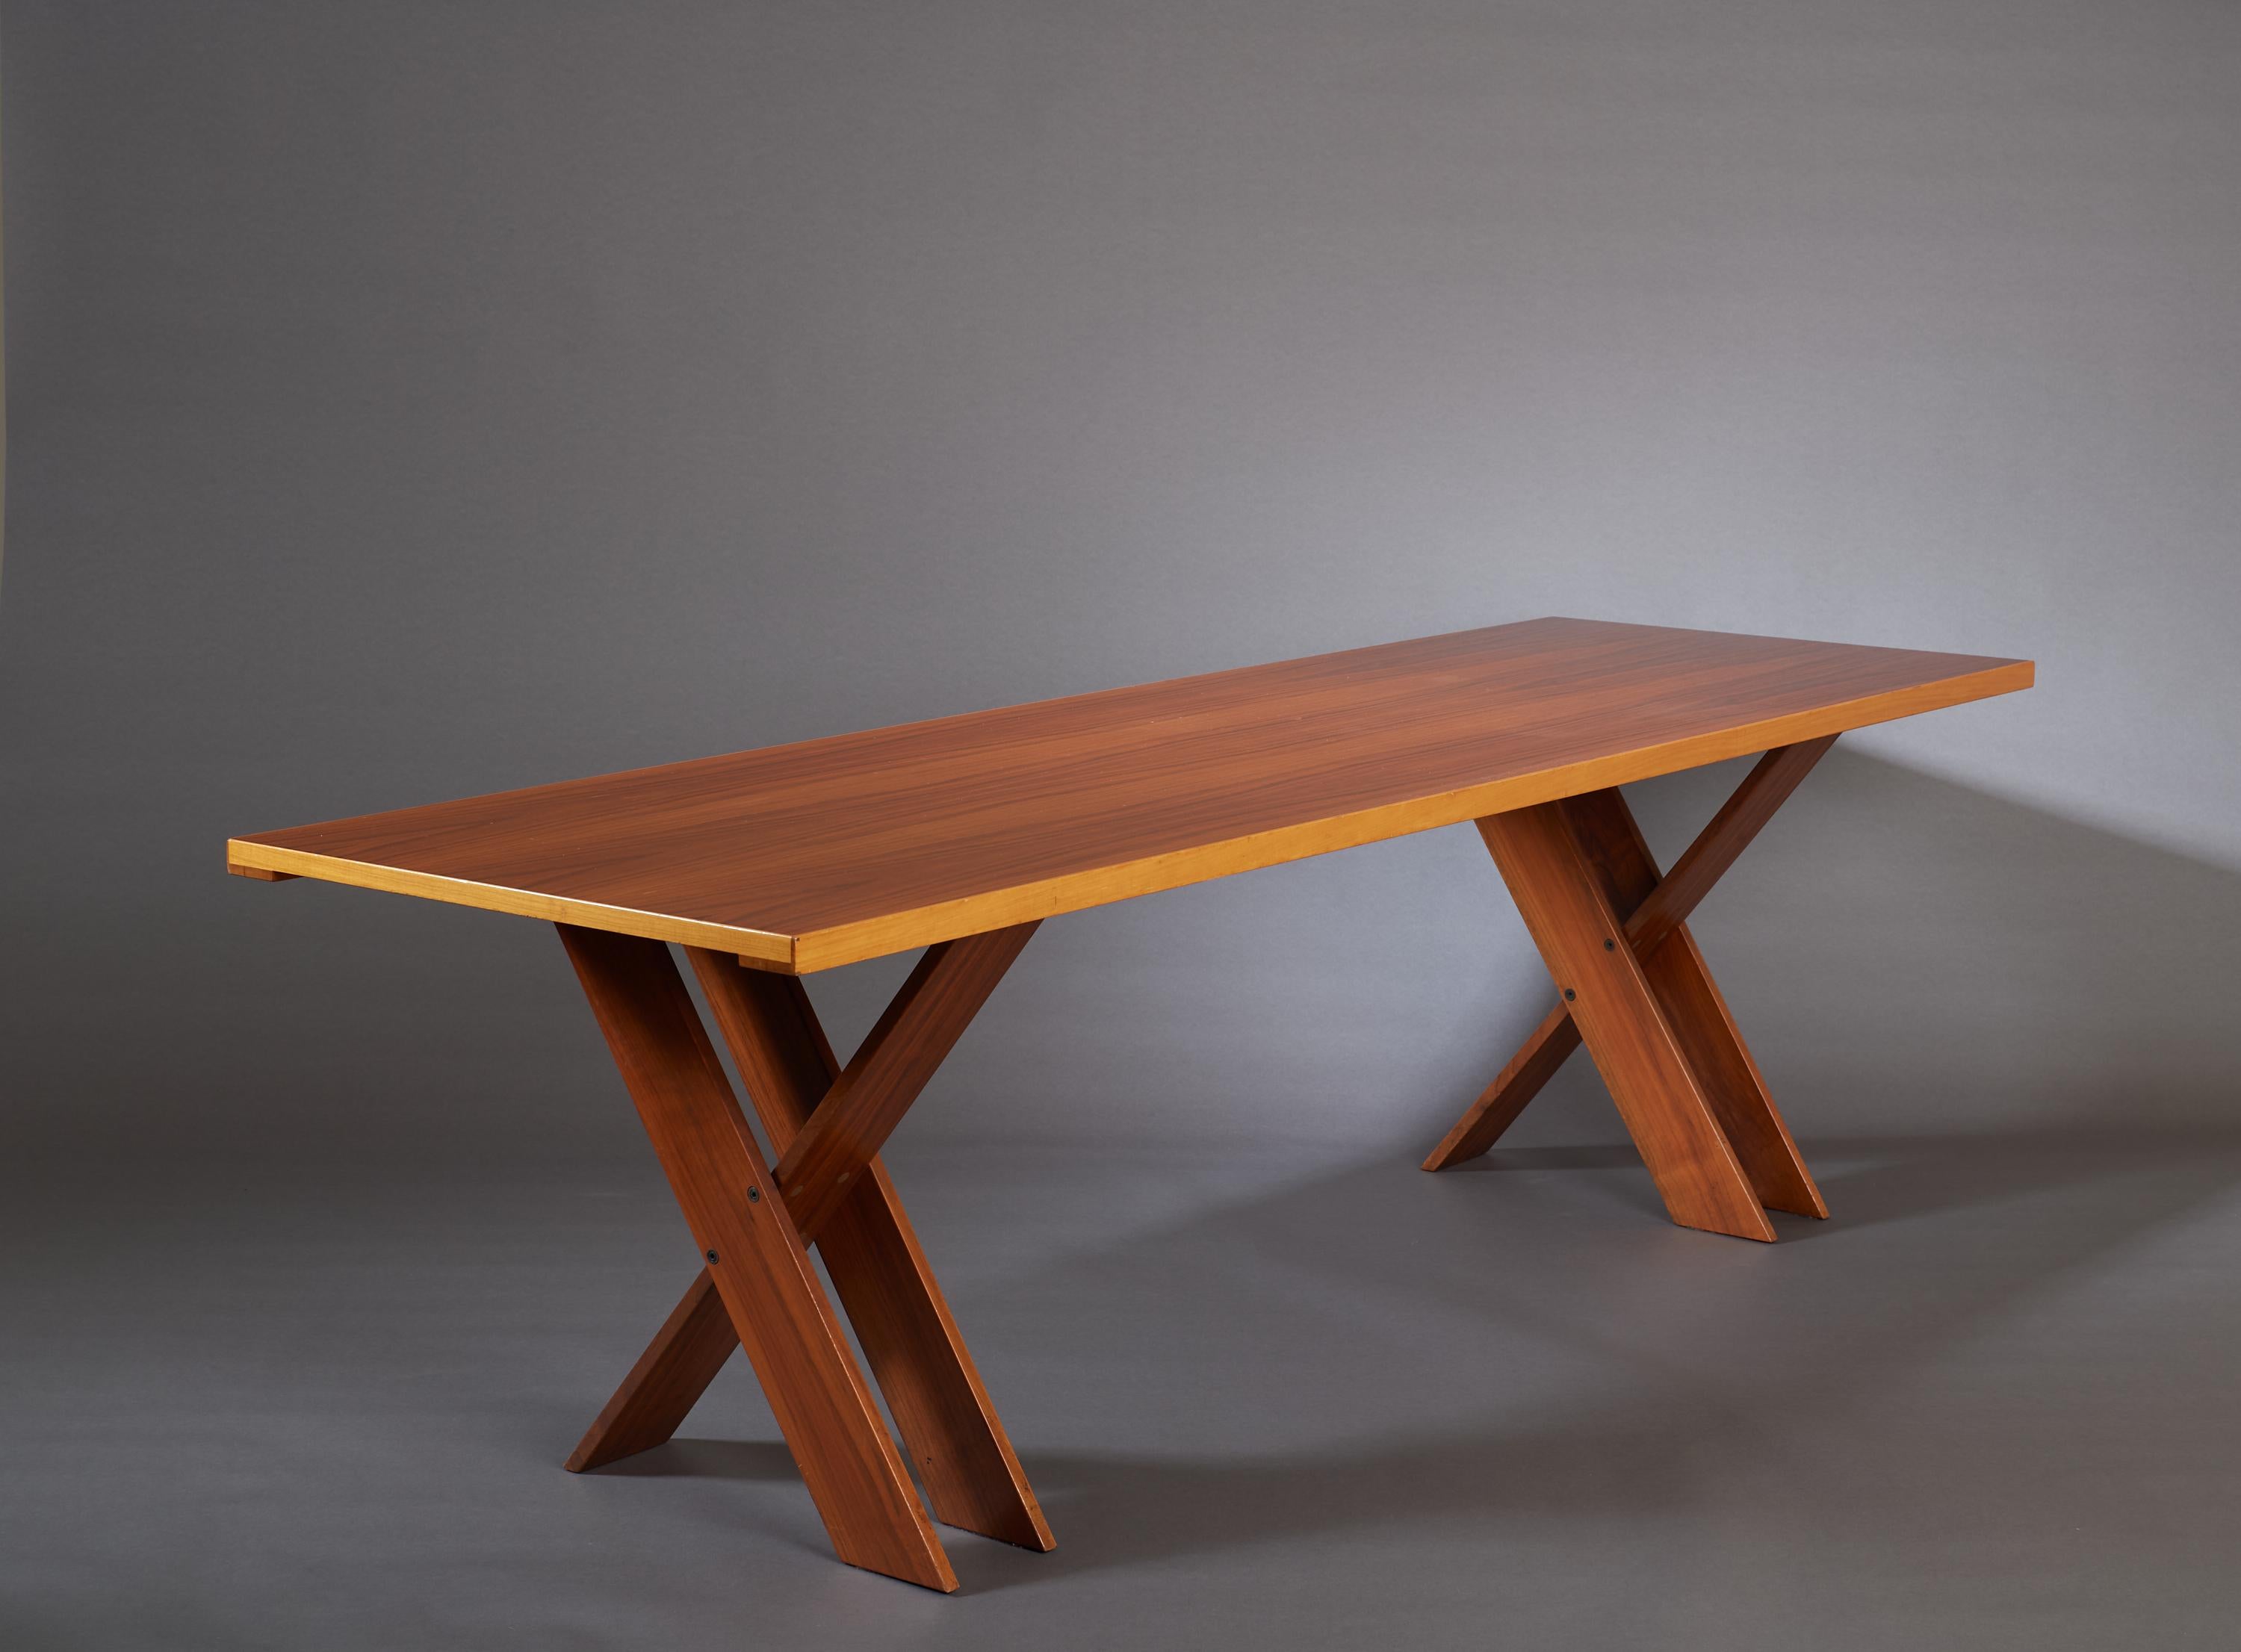 Marco Zanuso (1916-2001)

A large and striking modernist dining table by Marco Zanuso, in polished walnut. With architectural double X-legs and a beautiful two-tone top, the pure, strong lines of the design are complimented by the  tactile grain of